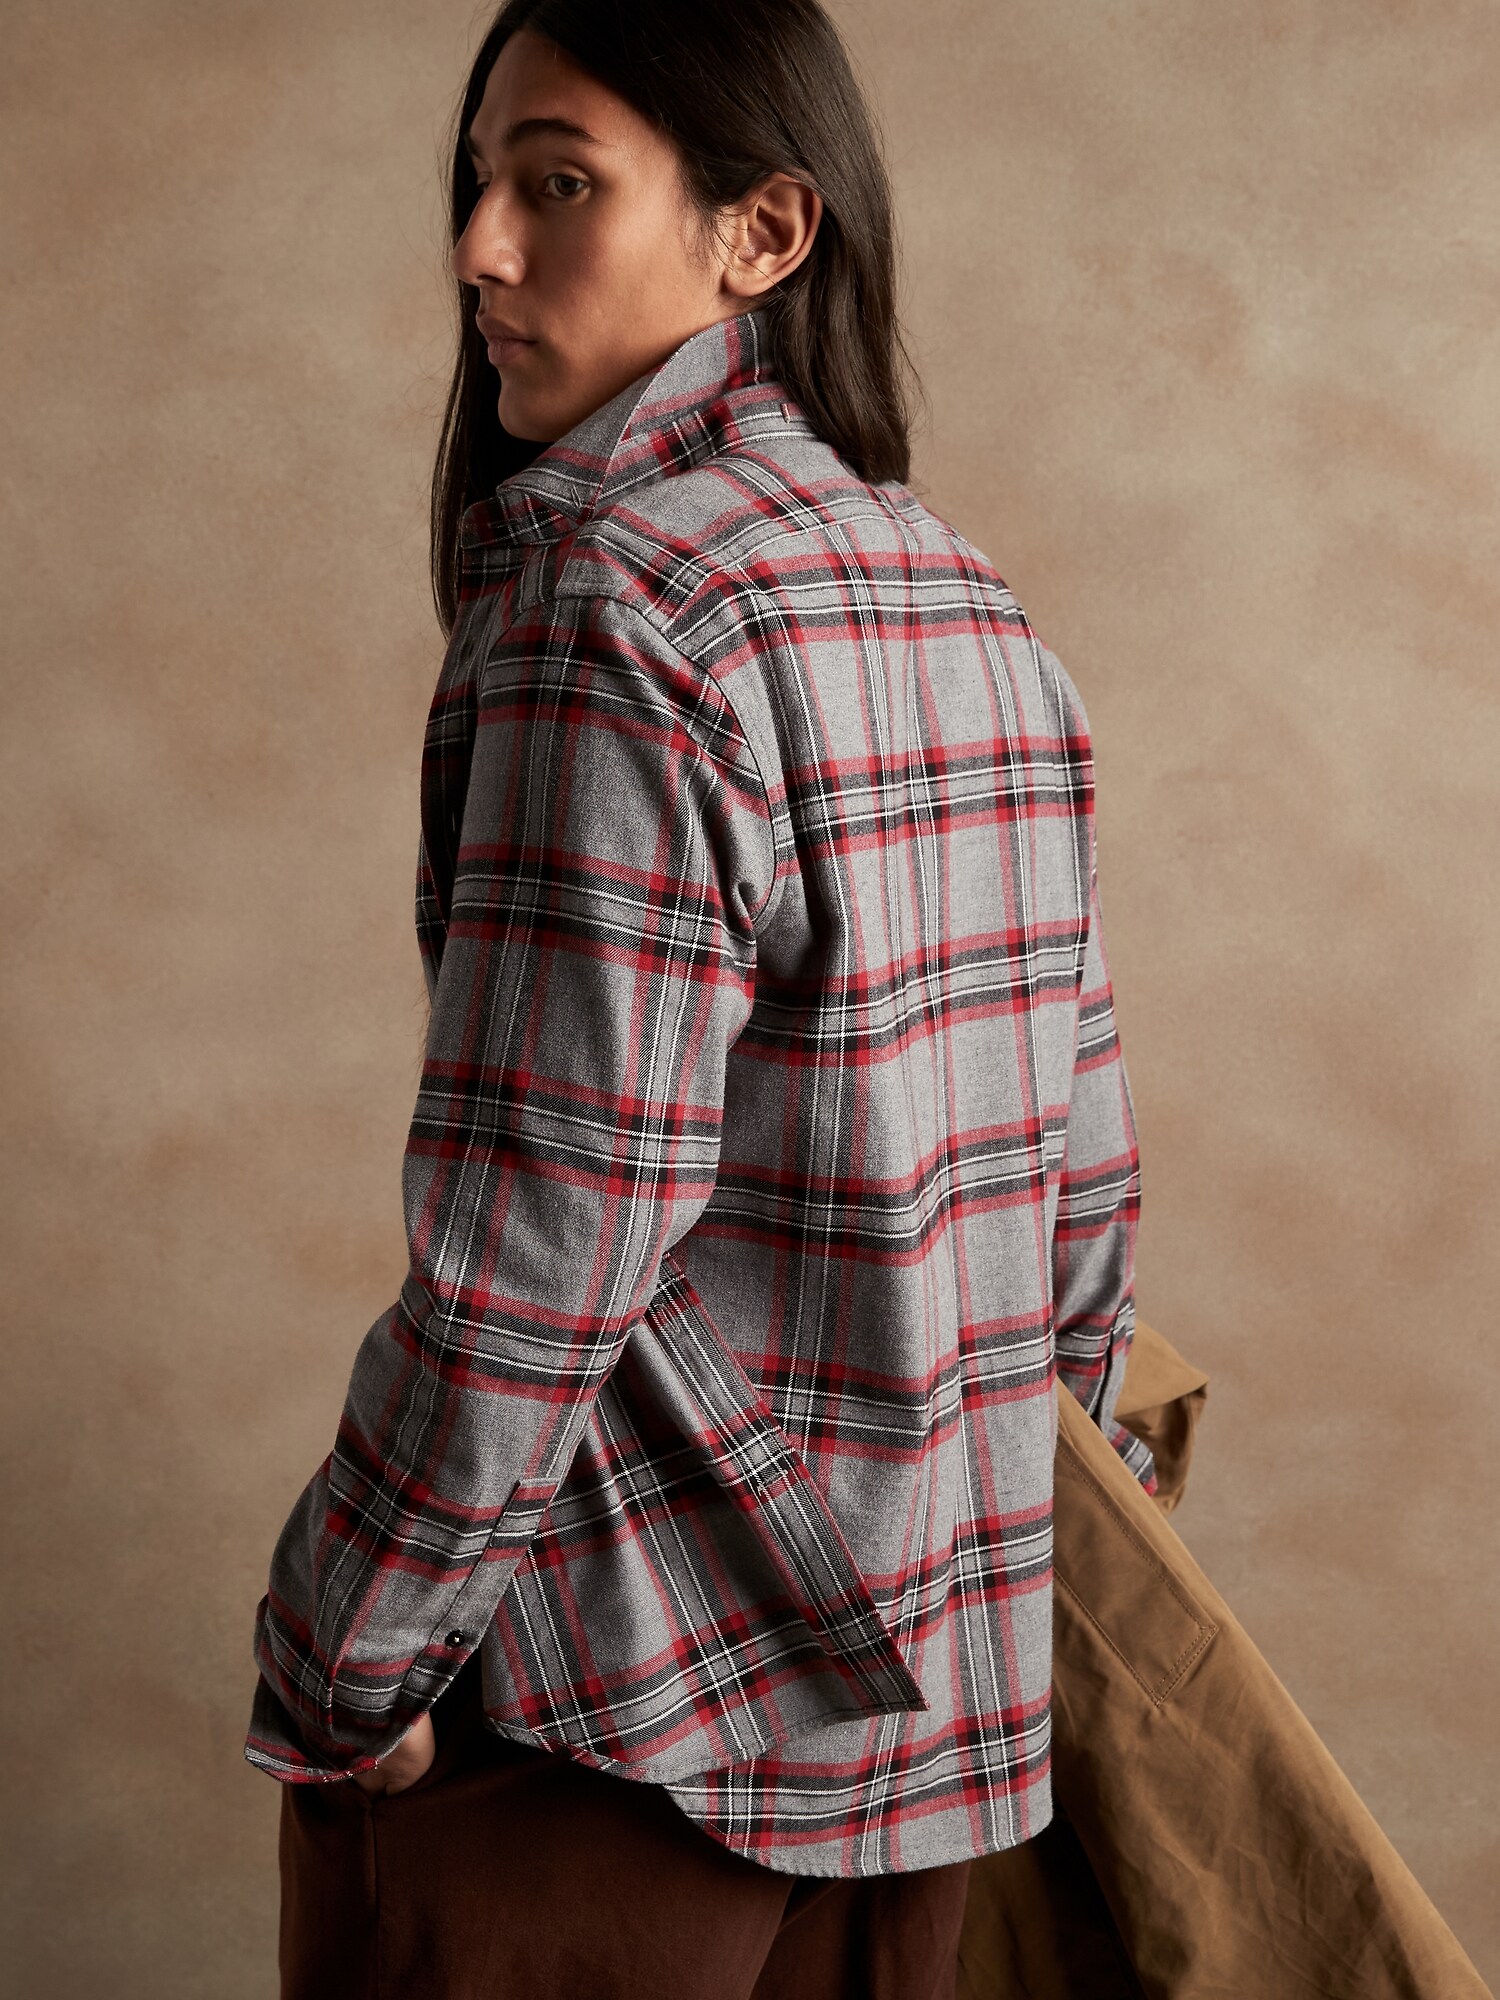 Untucked Standard-Fit Flannel Shirt